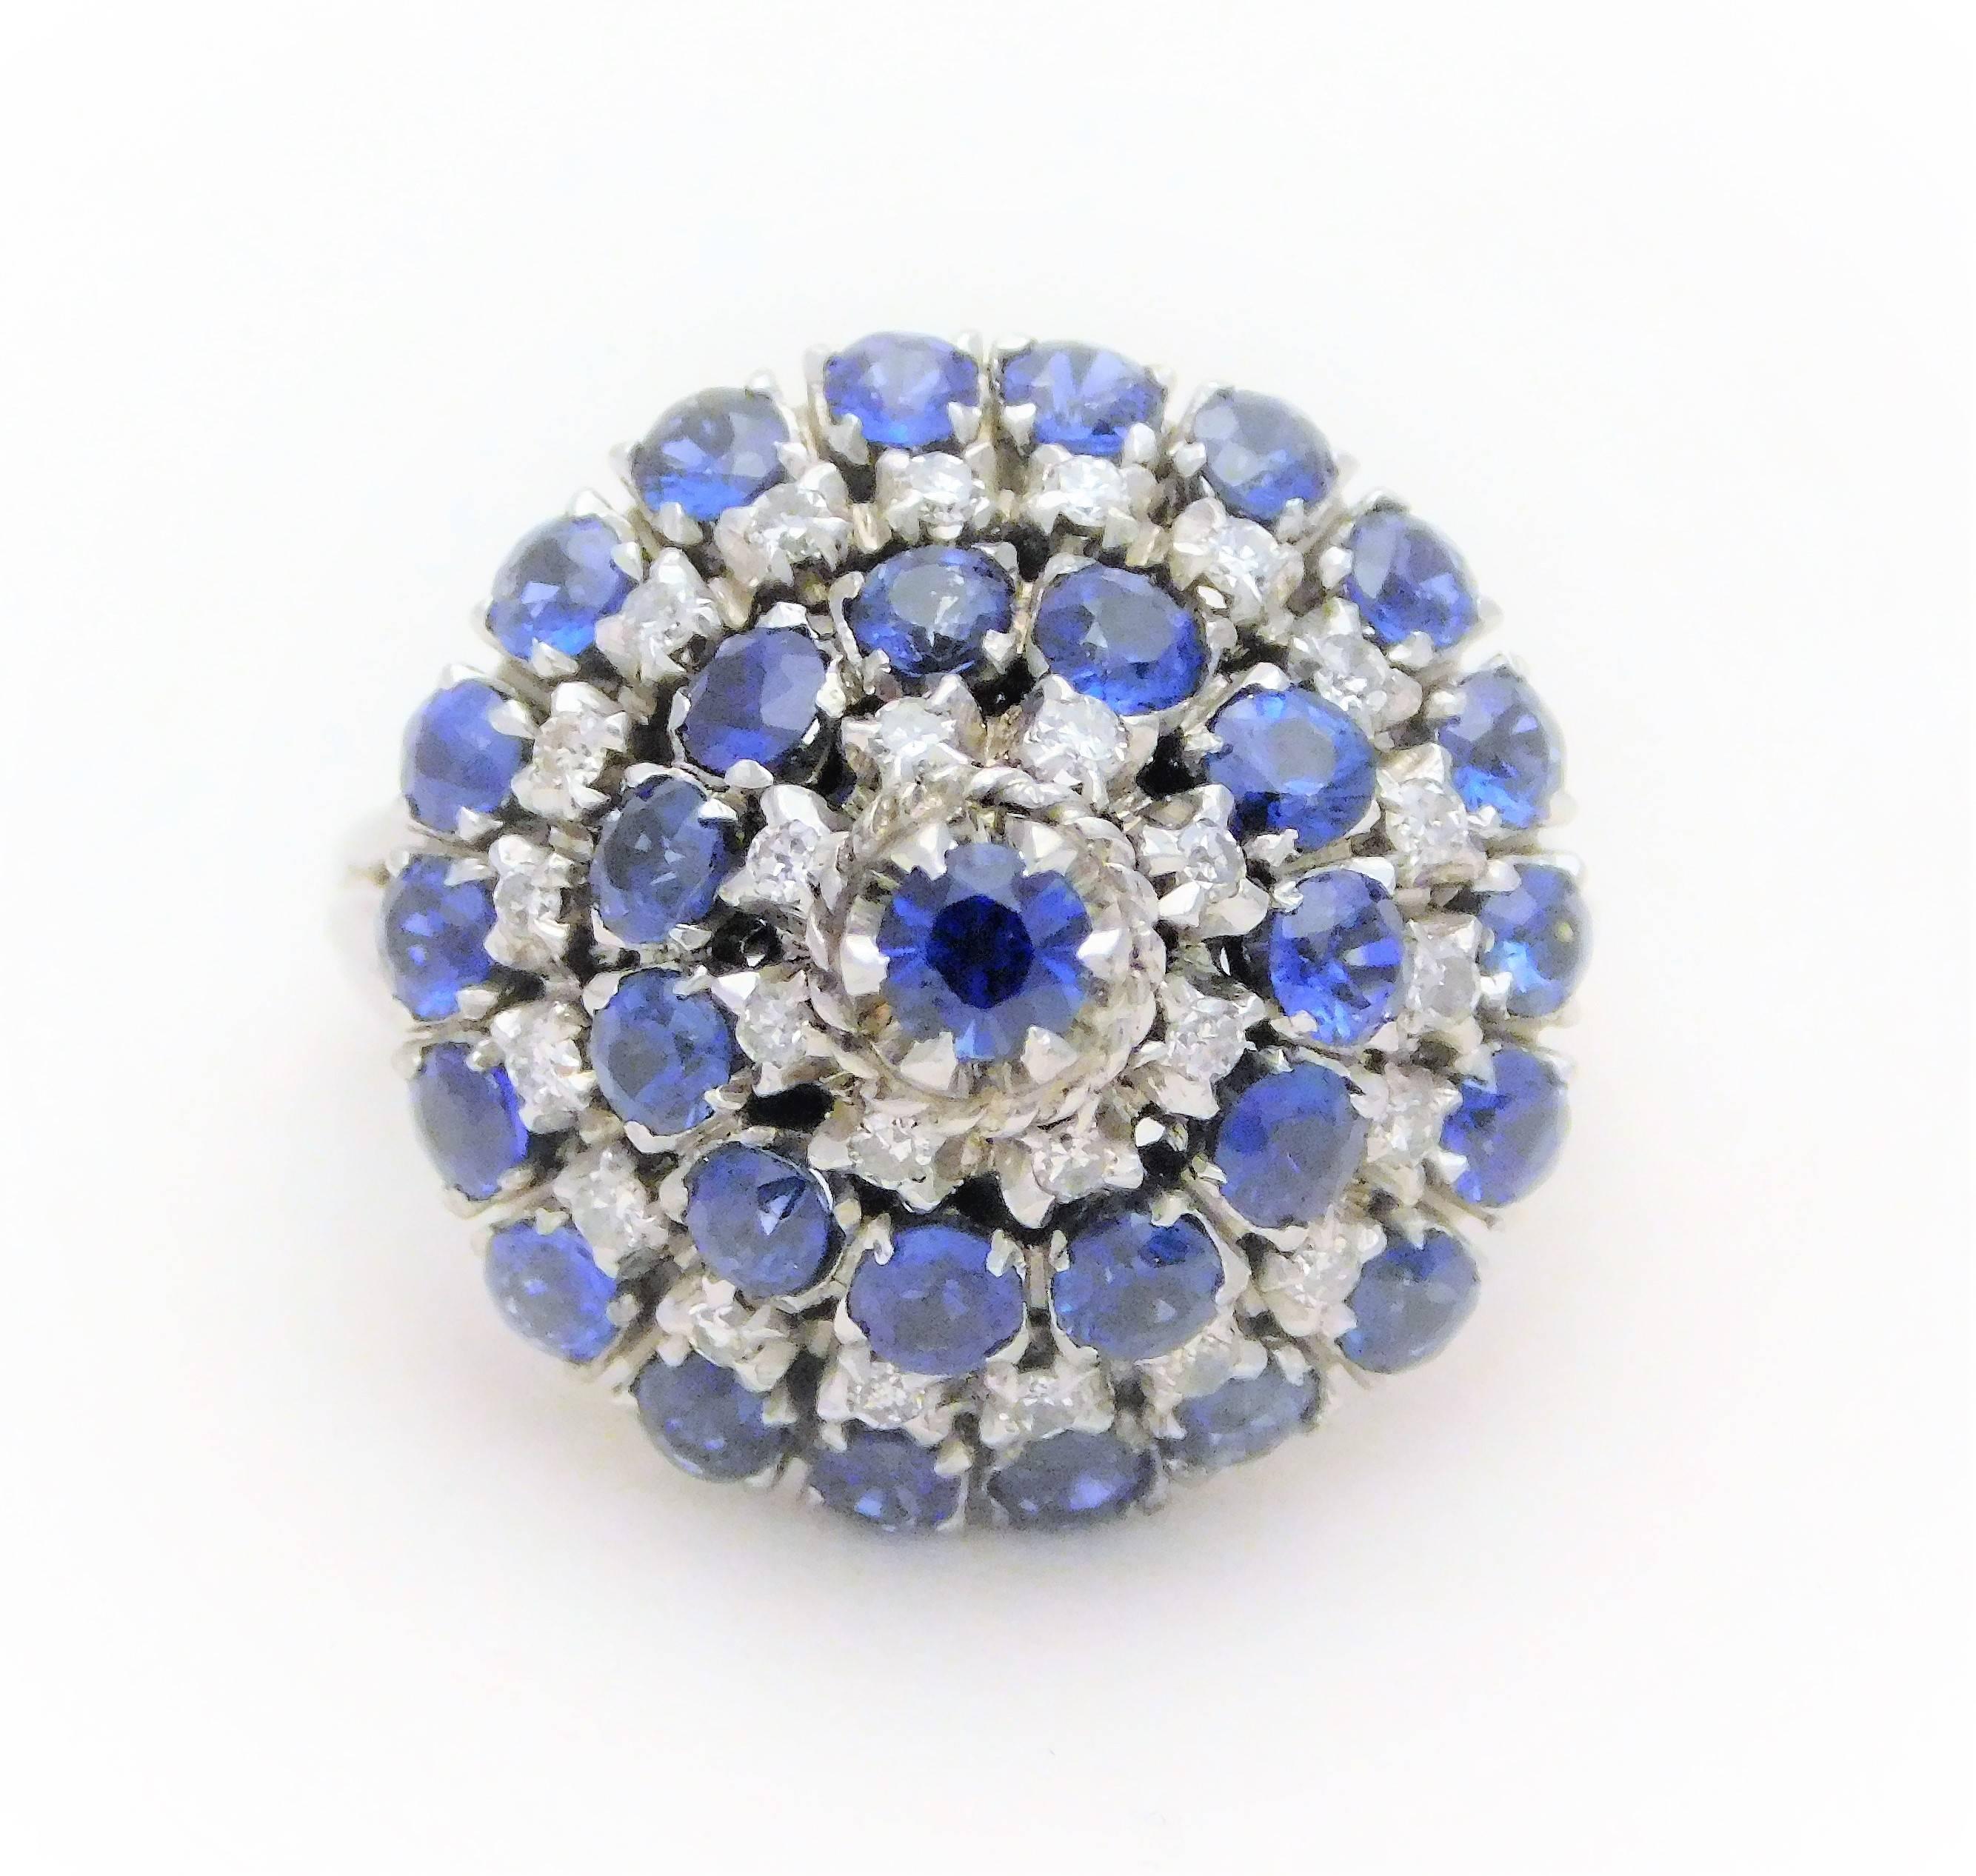 Women's Midcentury Diamond and Sapphire Spinning Dome Ring, circa 1943 For Sale